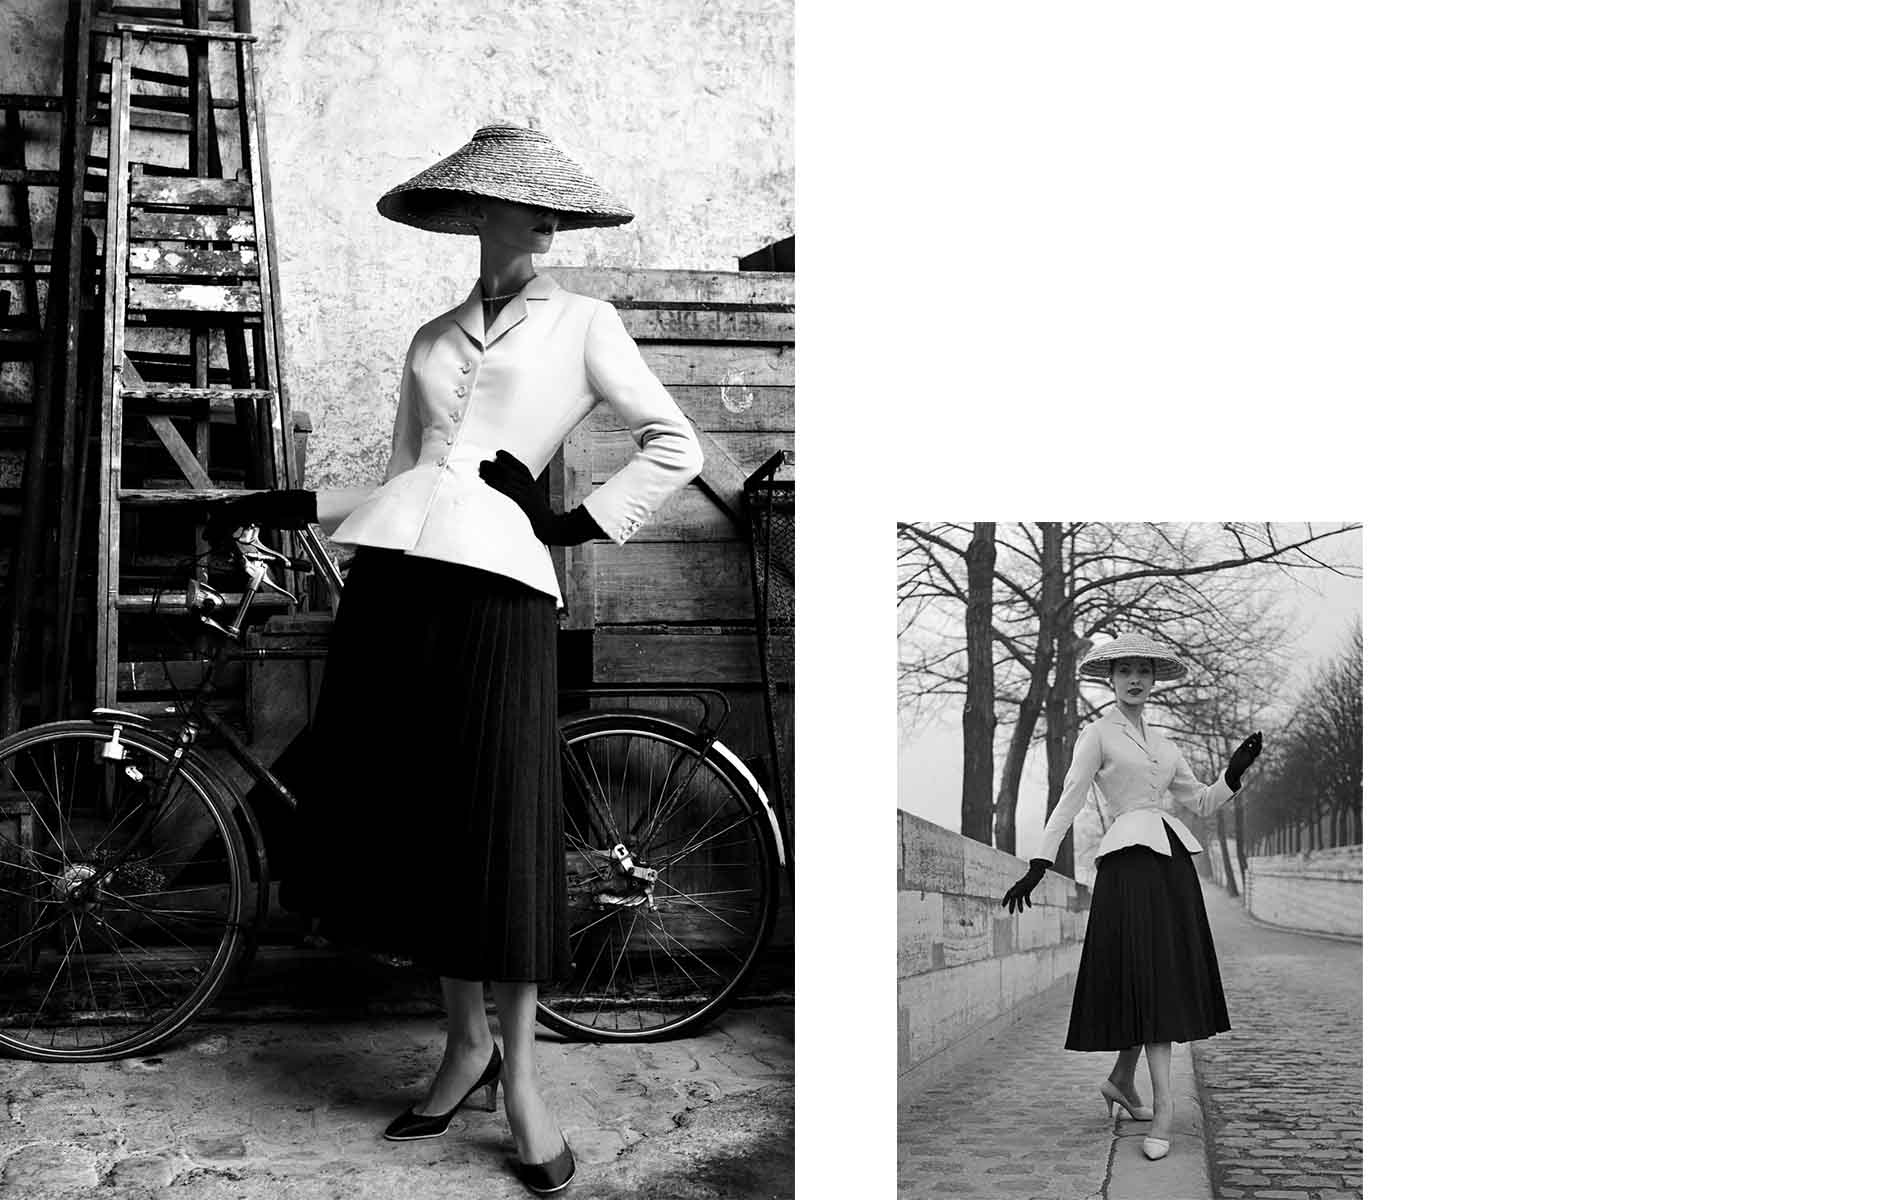 The Trendsetting 1950s Women's Fashion